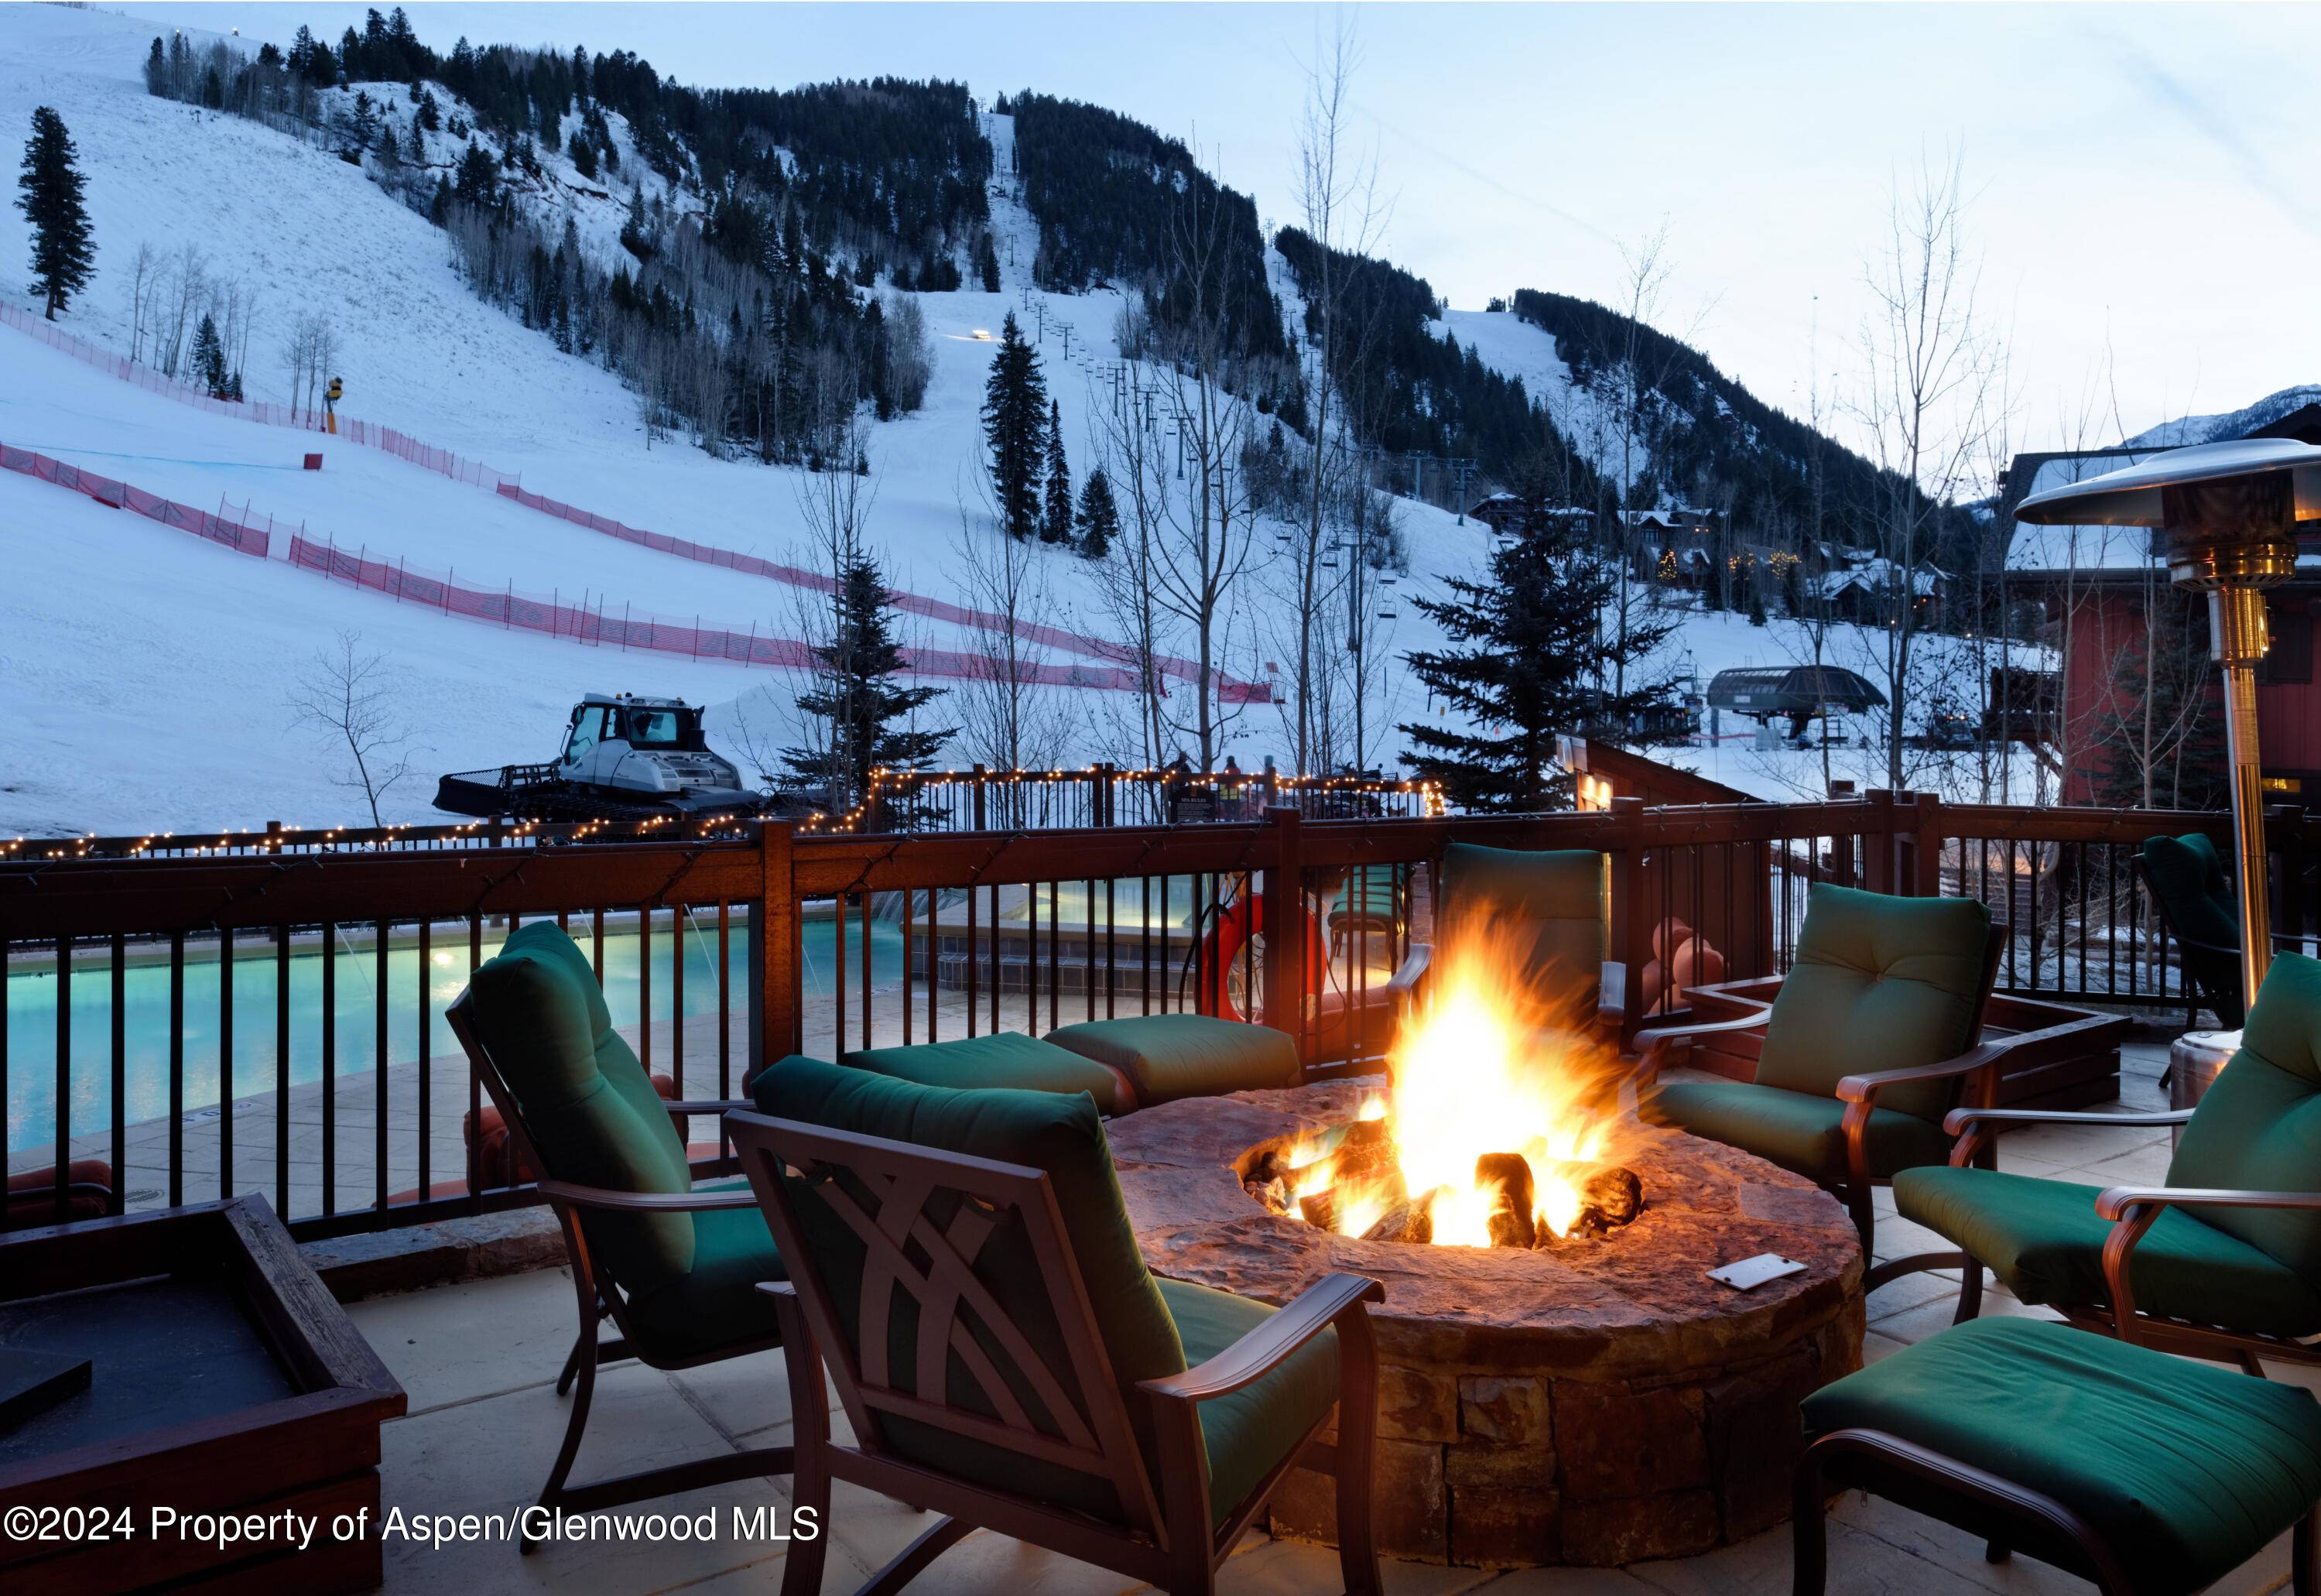 Ownership opportunity at The Ritz Carlton Club Aspen Highlands.